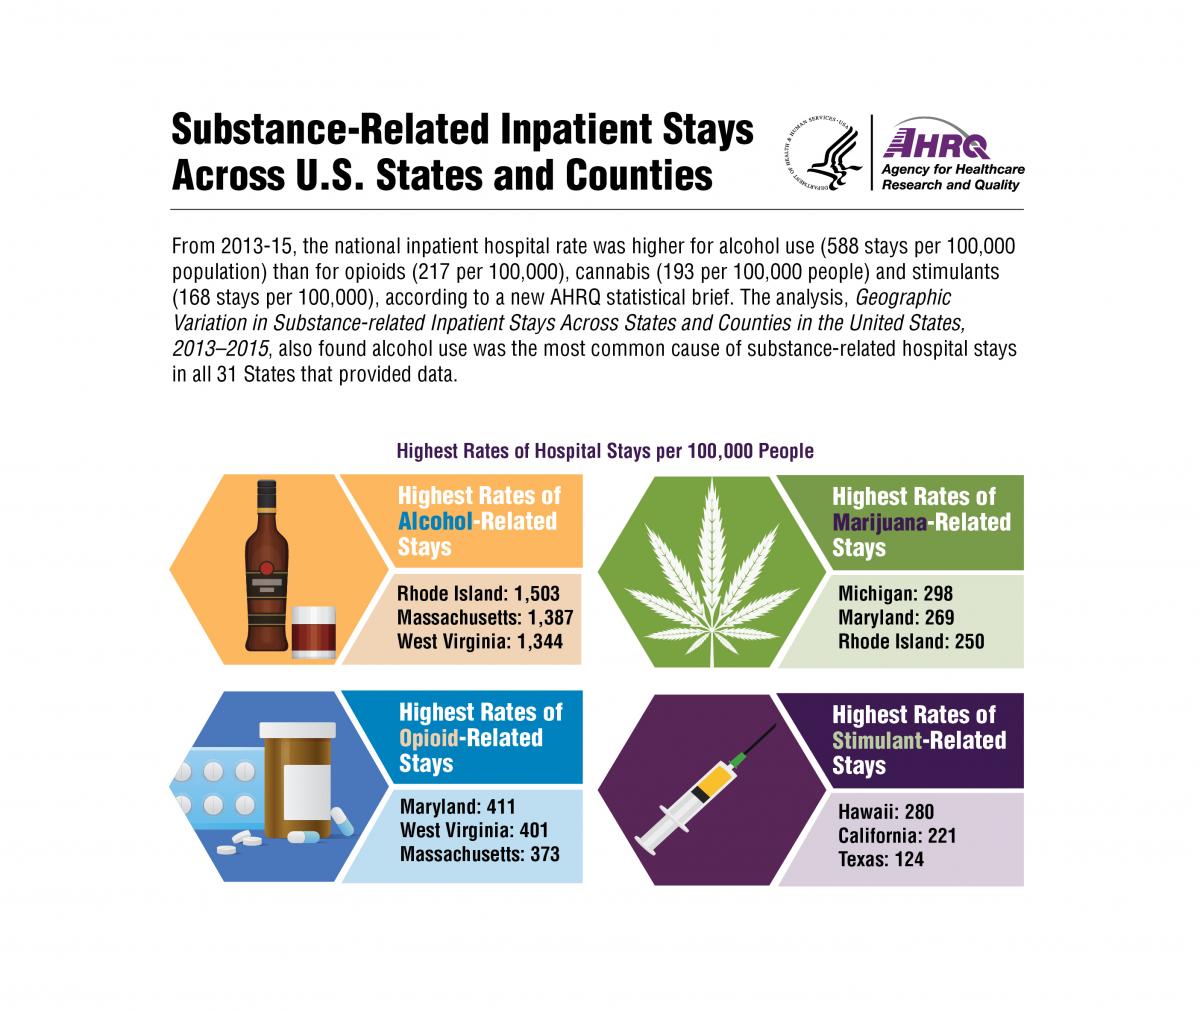 Images representing various substances of abuse that can lead to hospital stays. 2013-2015, highest rates of alcohol-related stays were Rhode Island (1,503), Massachusetts (1,387), West Virginia (1,344); highest rates of opioid-related stays were Maryland (411), West Virginia (401), Massachusetts (373); highest rates of marijuana-related stays were Michigan (298), Maryland (269), Rhode Island (250); highest rates of stimulant-related stays were Hawaii (280), California (221), Texas (124).